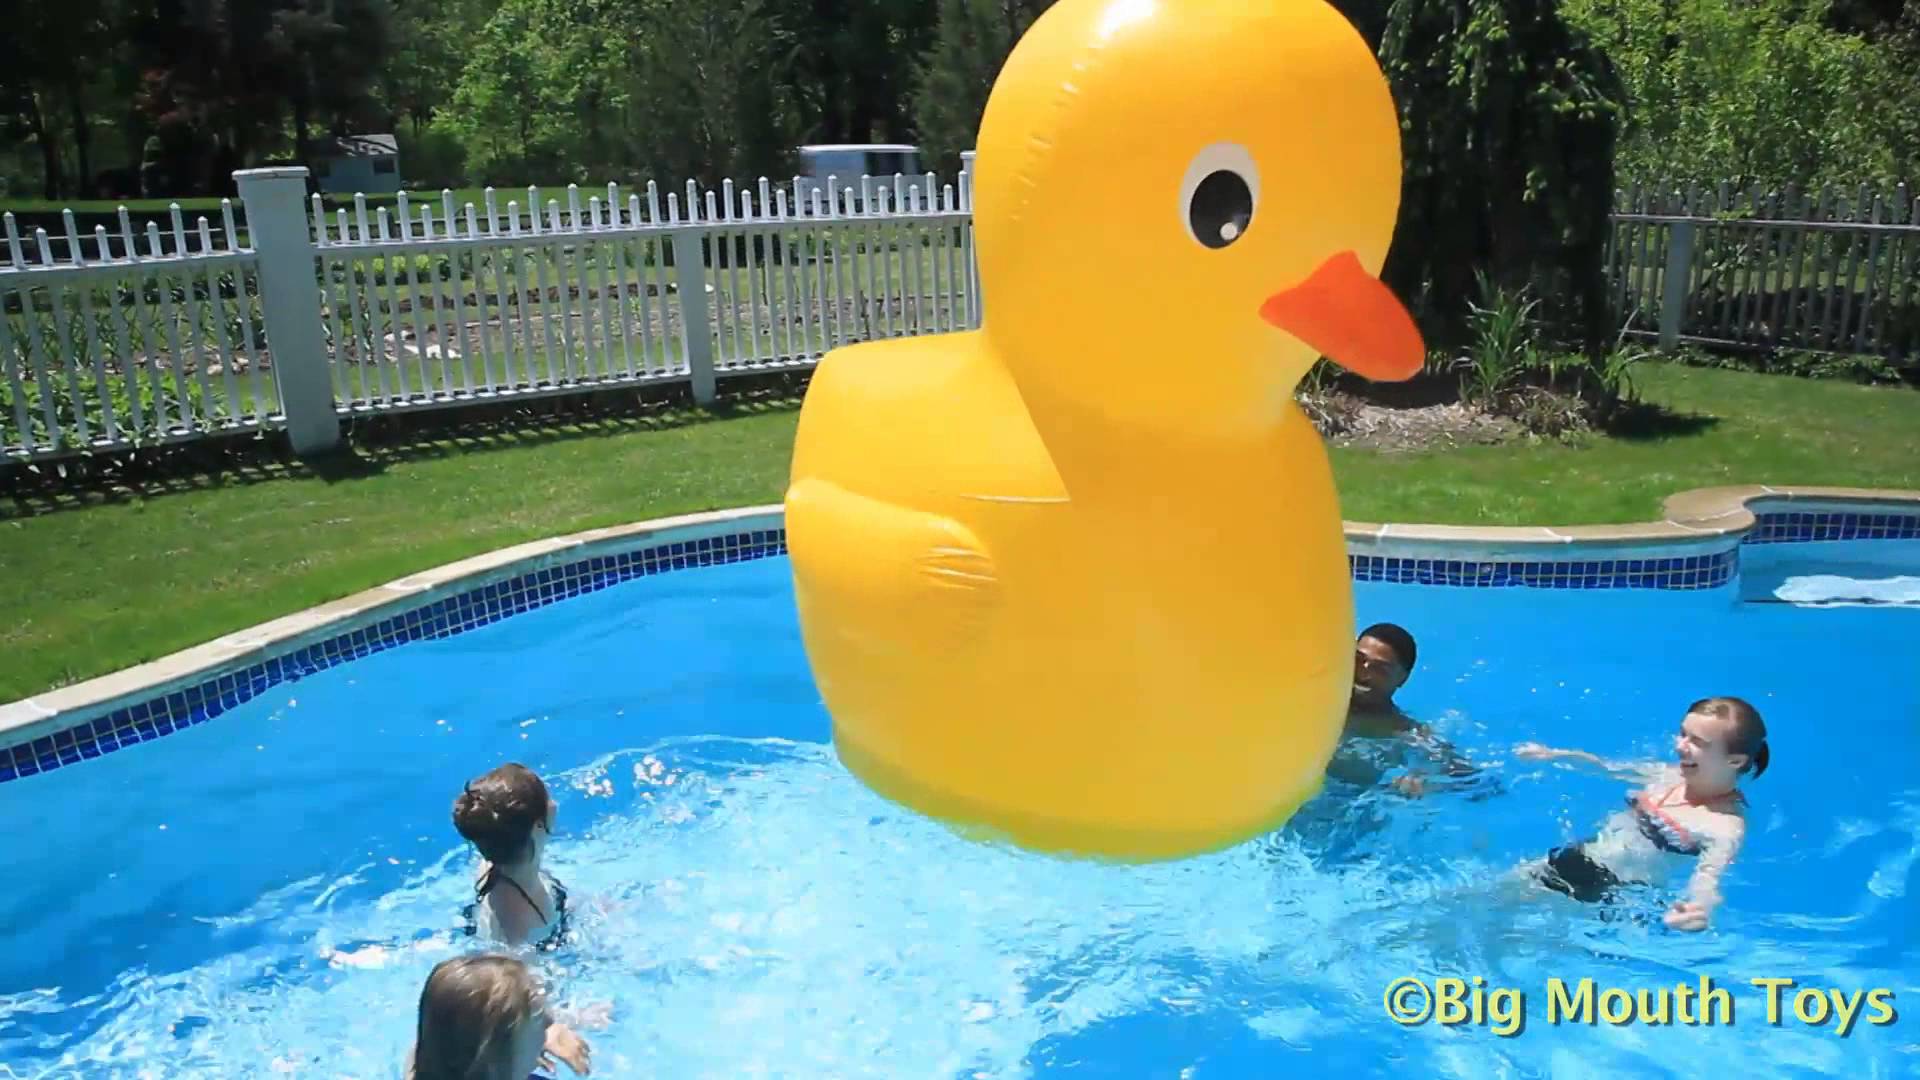 Rubberduckzilla - Giant Inflatable Duck From Gadget Inspector - YouTube